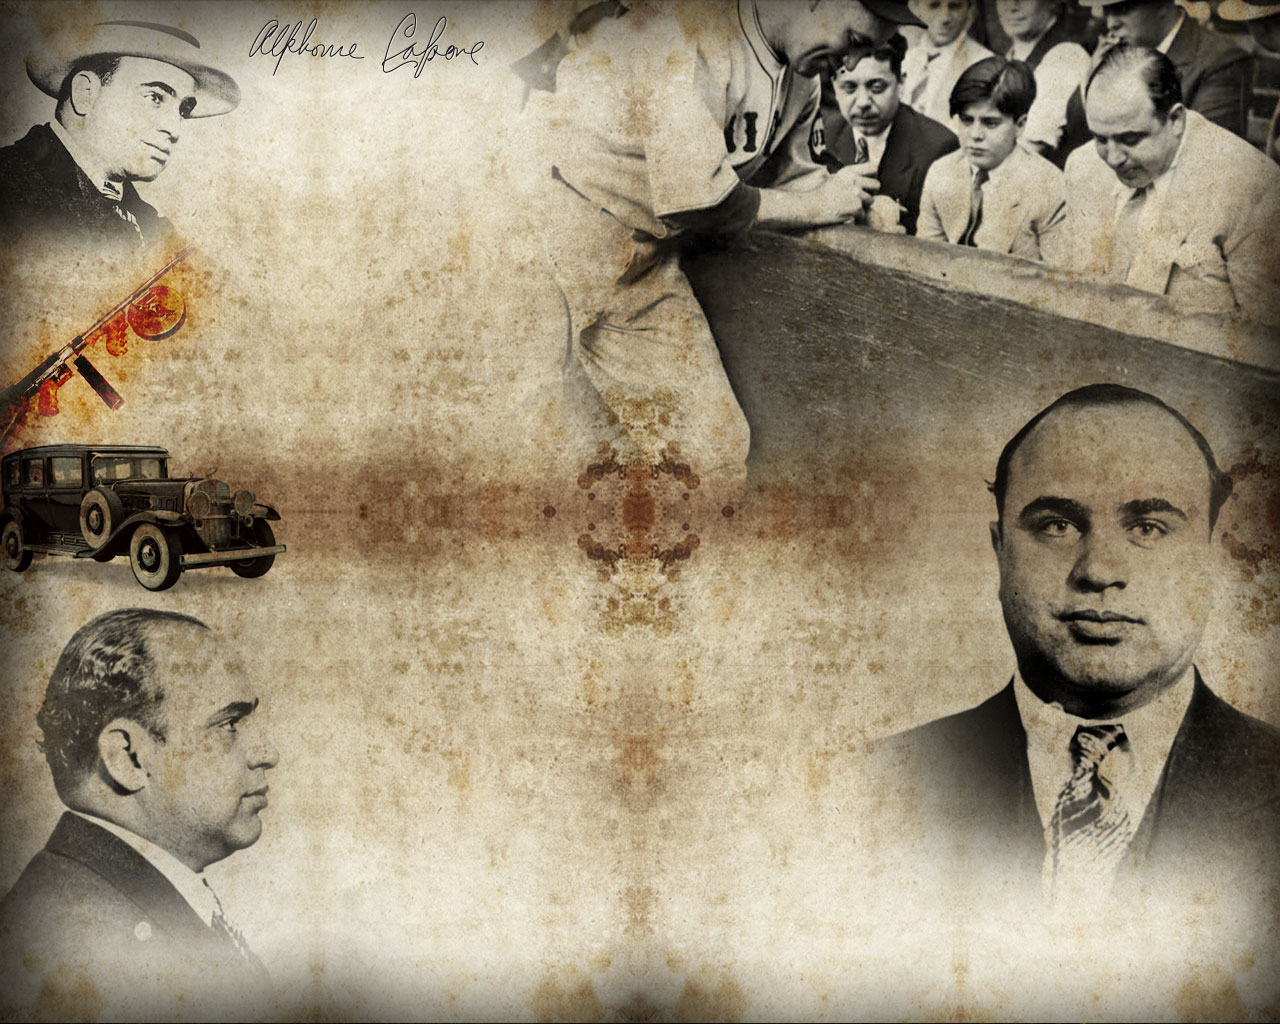 Al Capone World The Largest Database Online